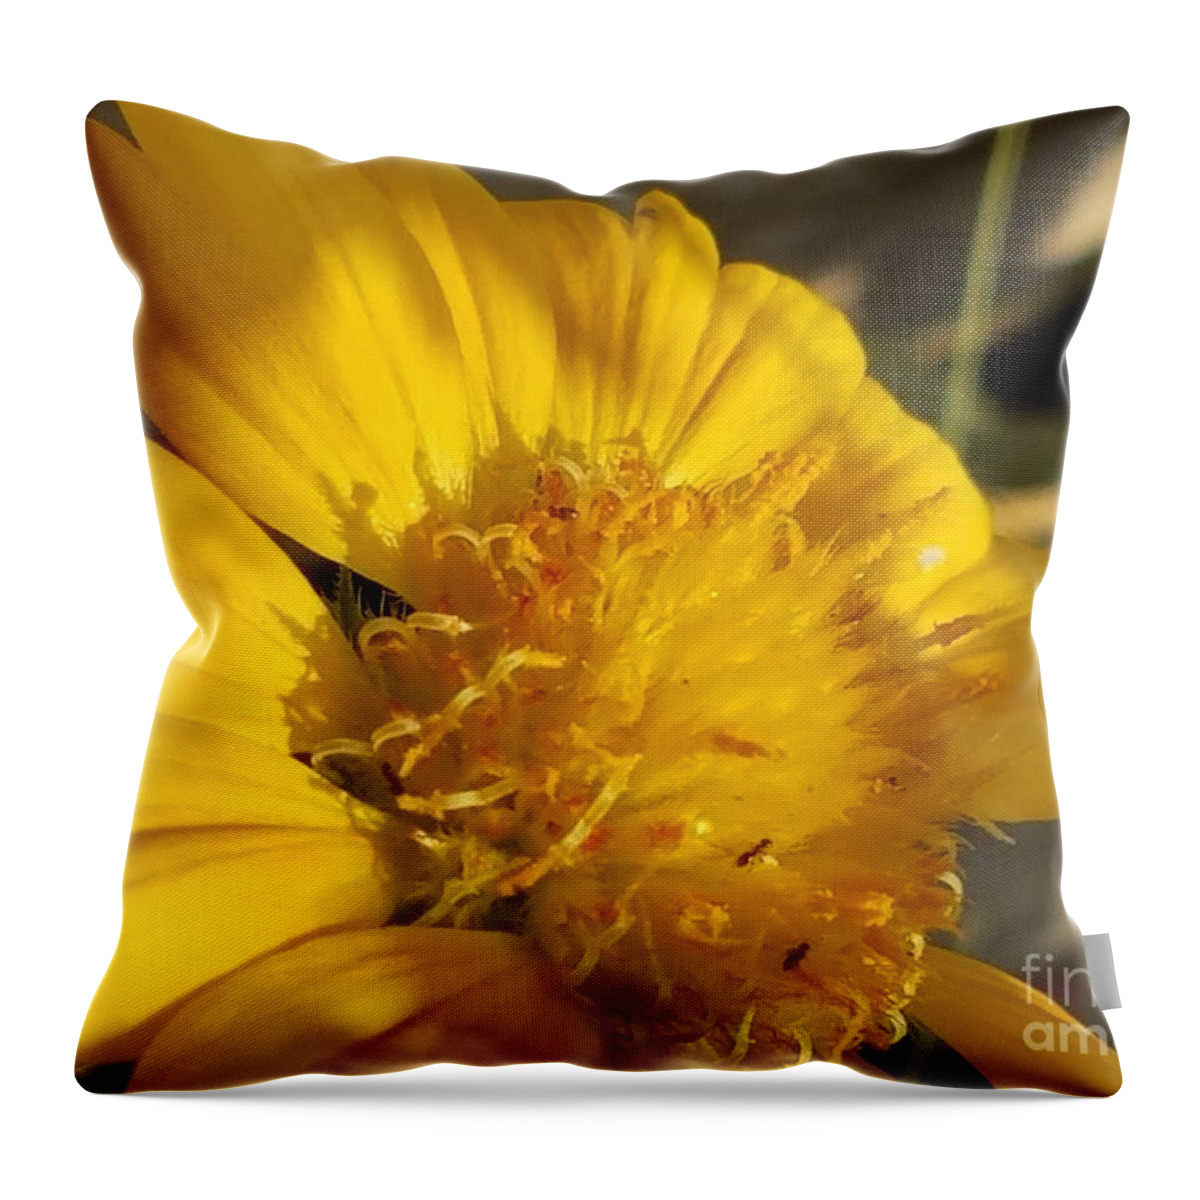 A Bit Of Sunshine Throw Pillow featuring the photograph A Bit of Sunshine by Maria Urso